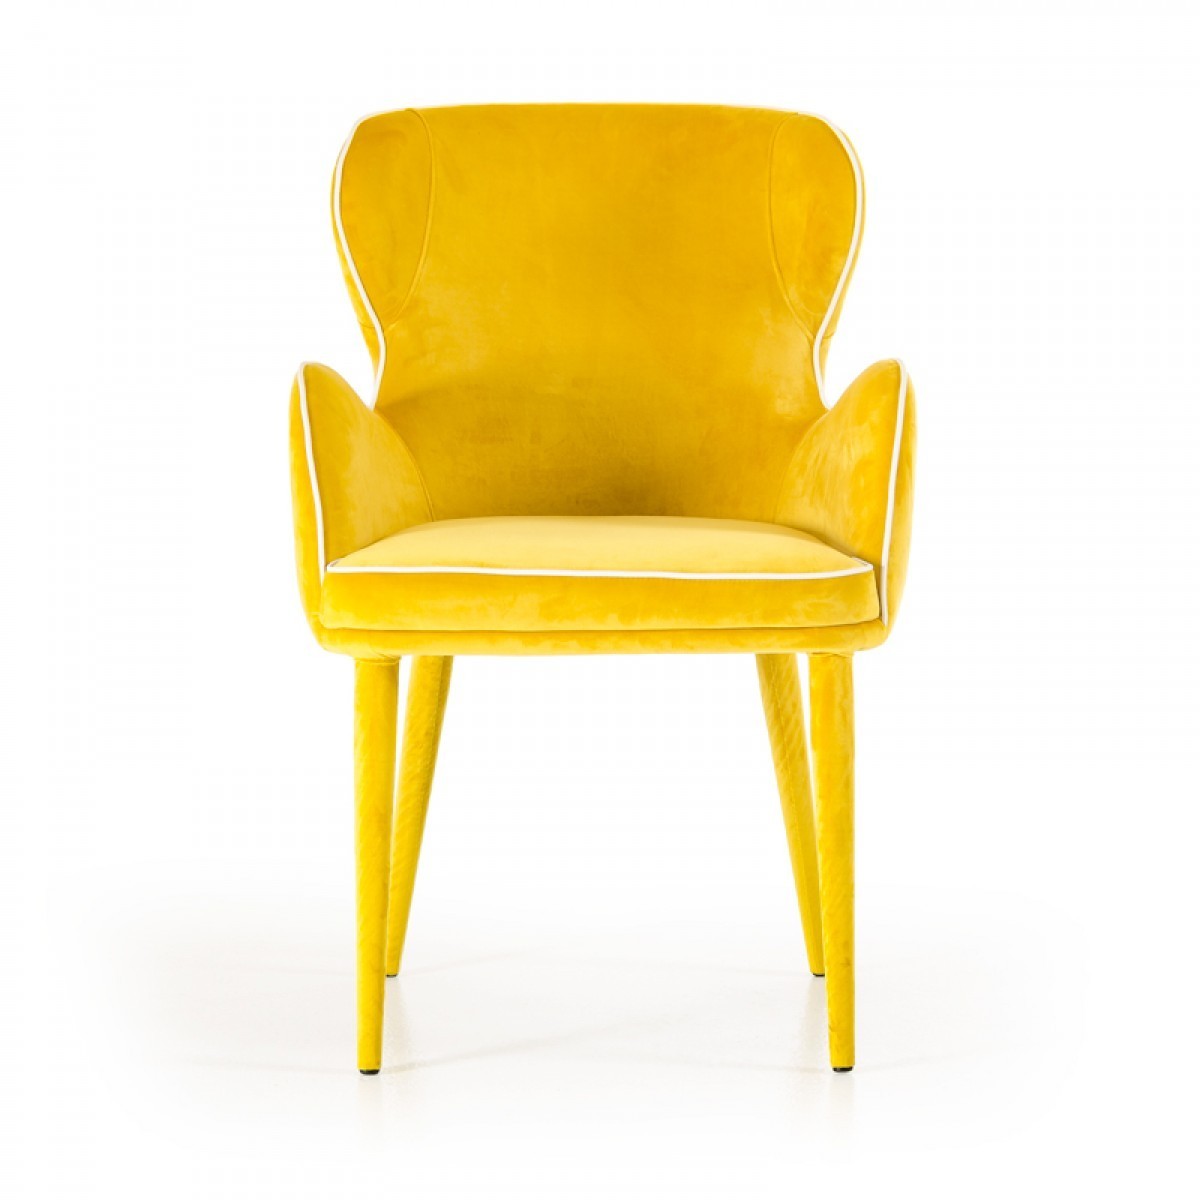 Modrest Tigard Yellow Fabric Dining Chair